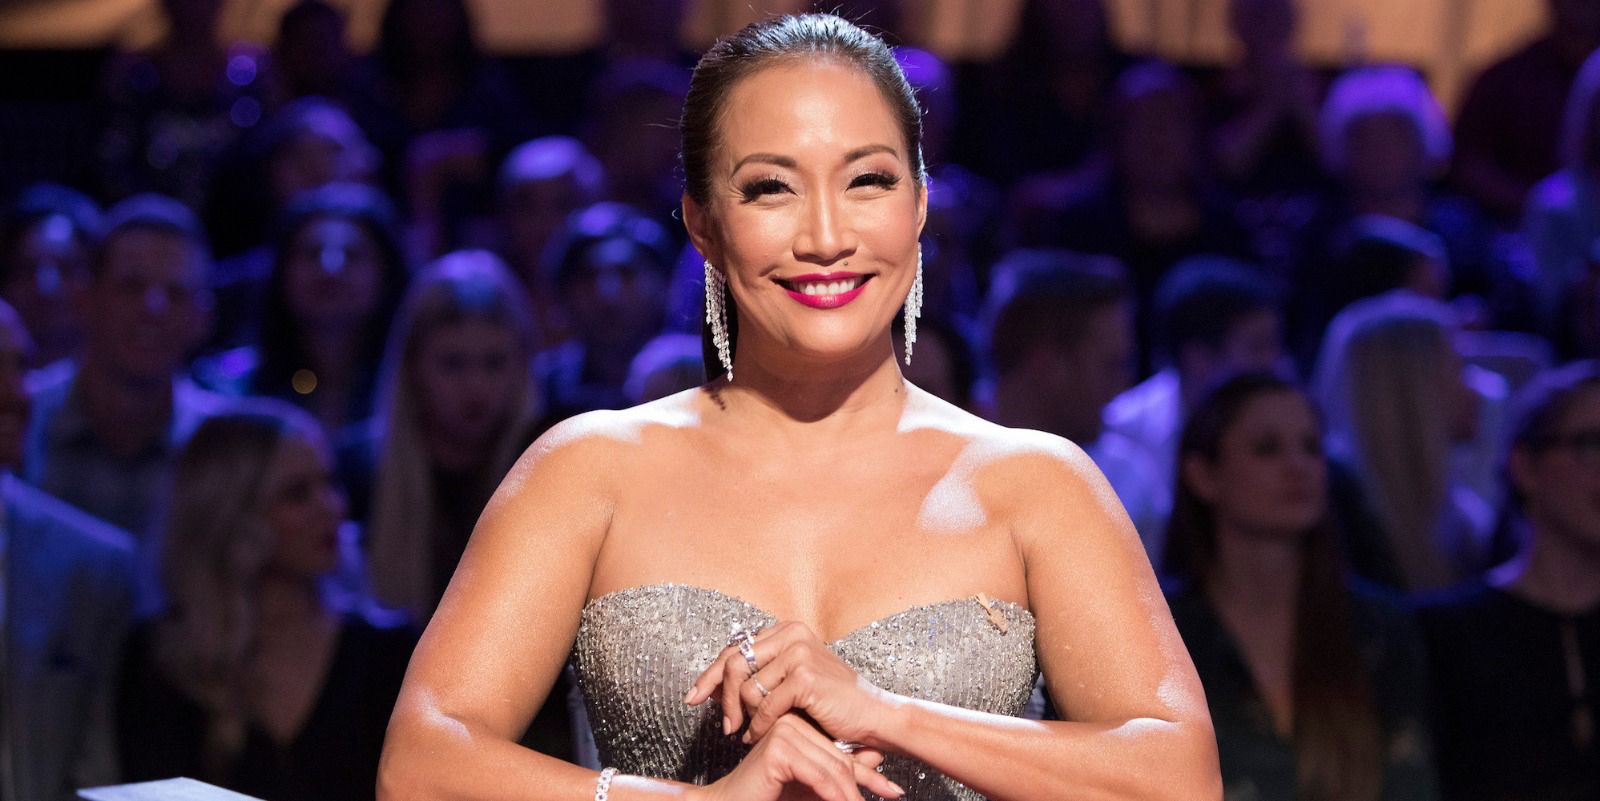 Dancing with the Stars Judge Carrie Ann Inaba on set